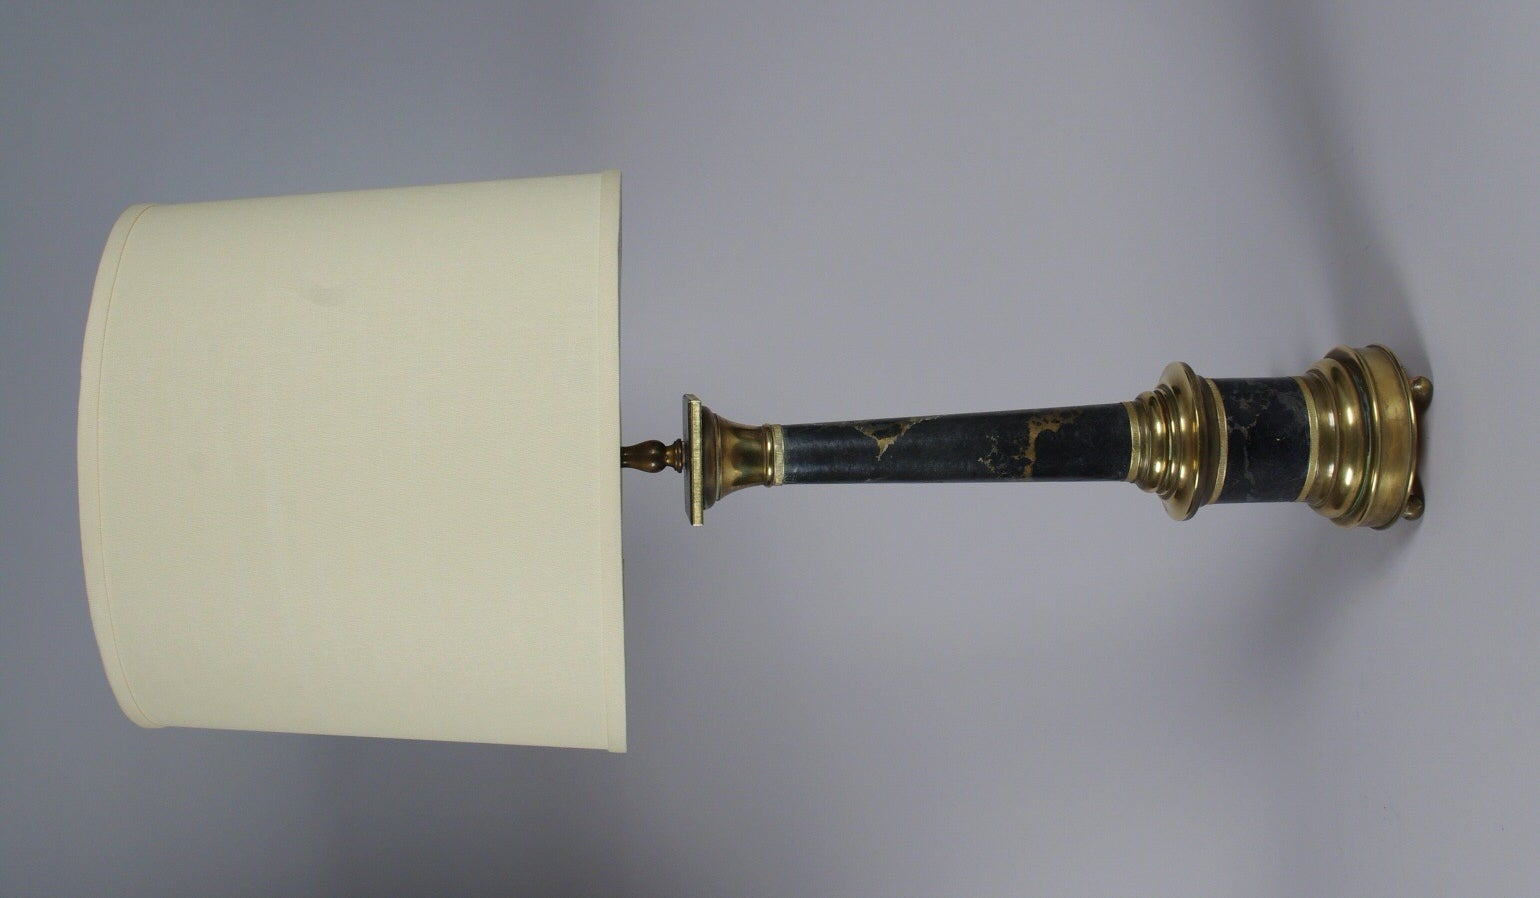 Wonderful brass column lamp trimmed with marbleized and gilt paper, on three ball feet.
Height to the top of the column, 20